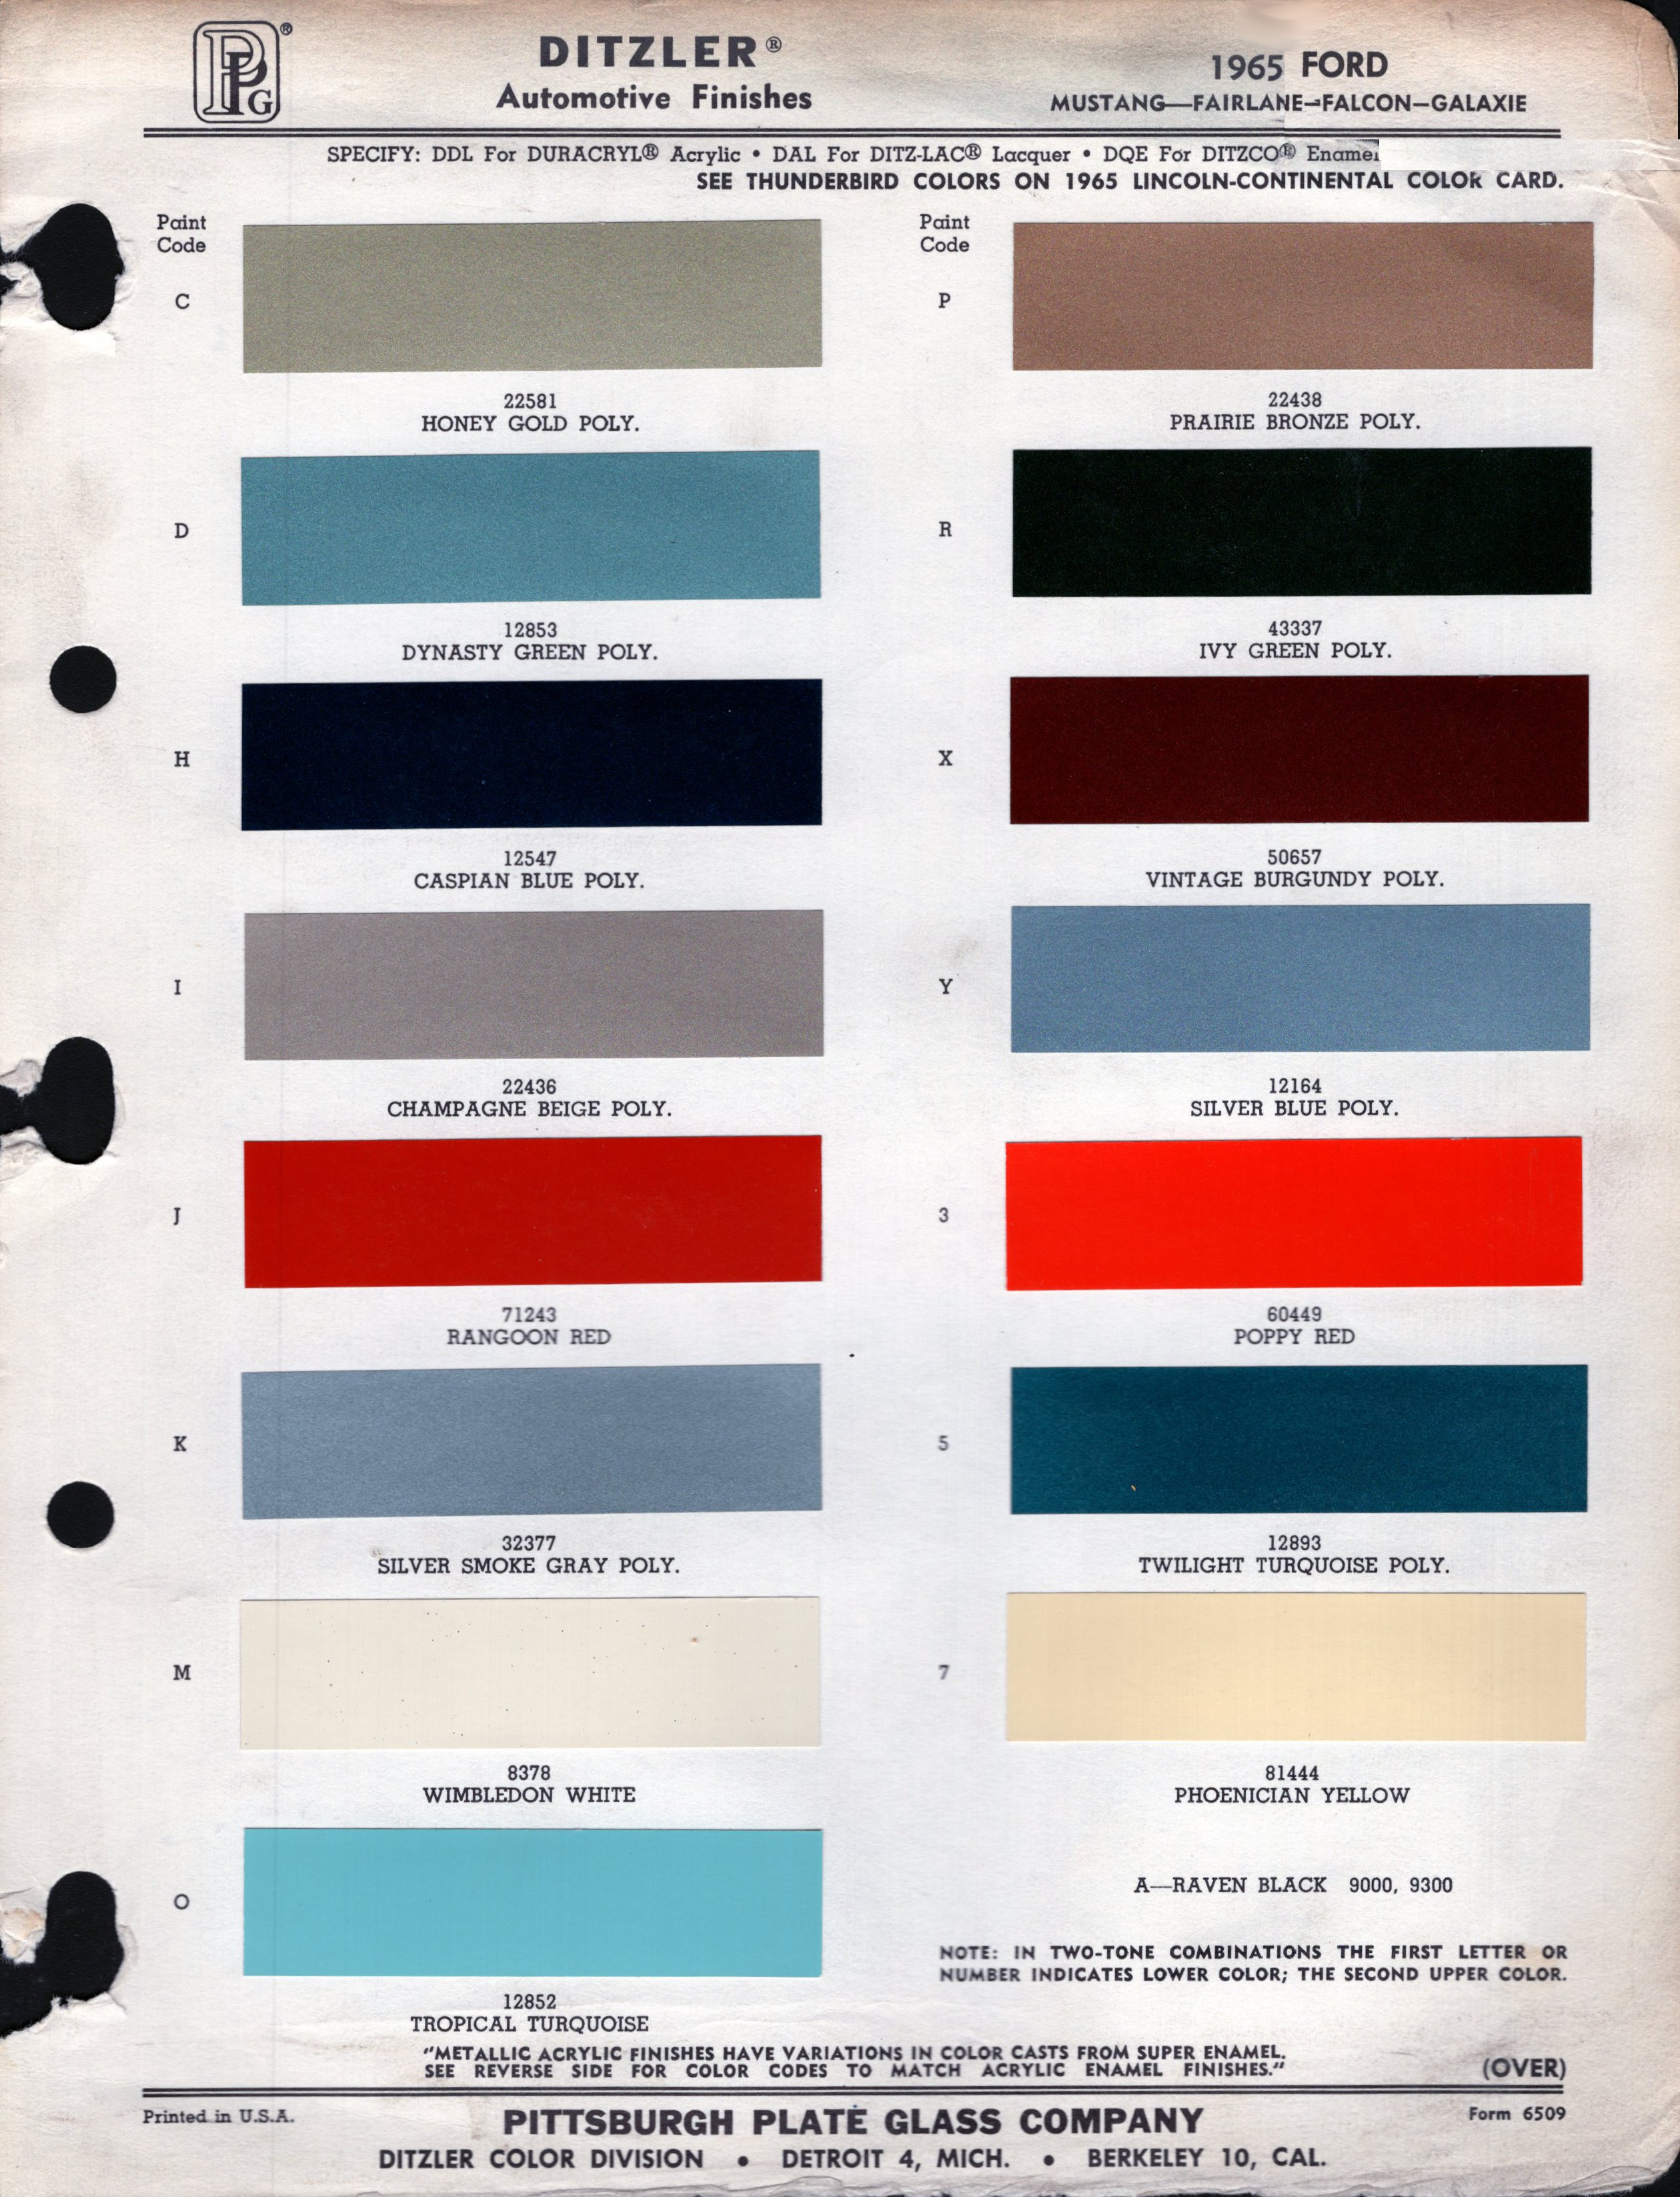 1965 Ford paint chips